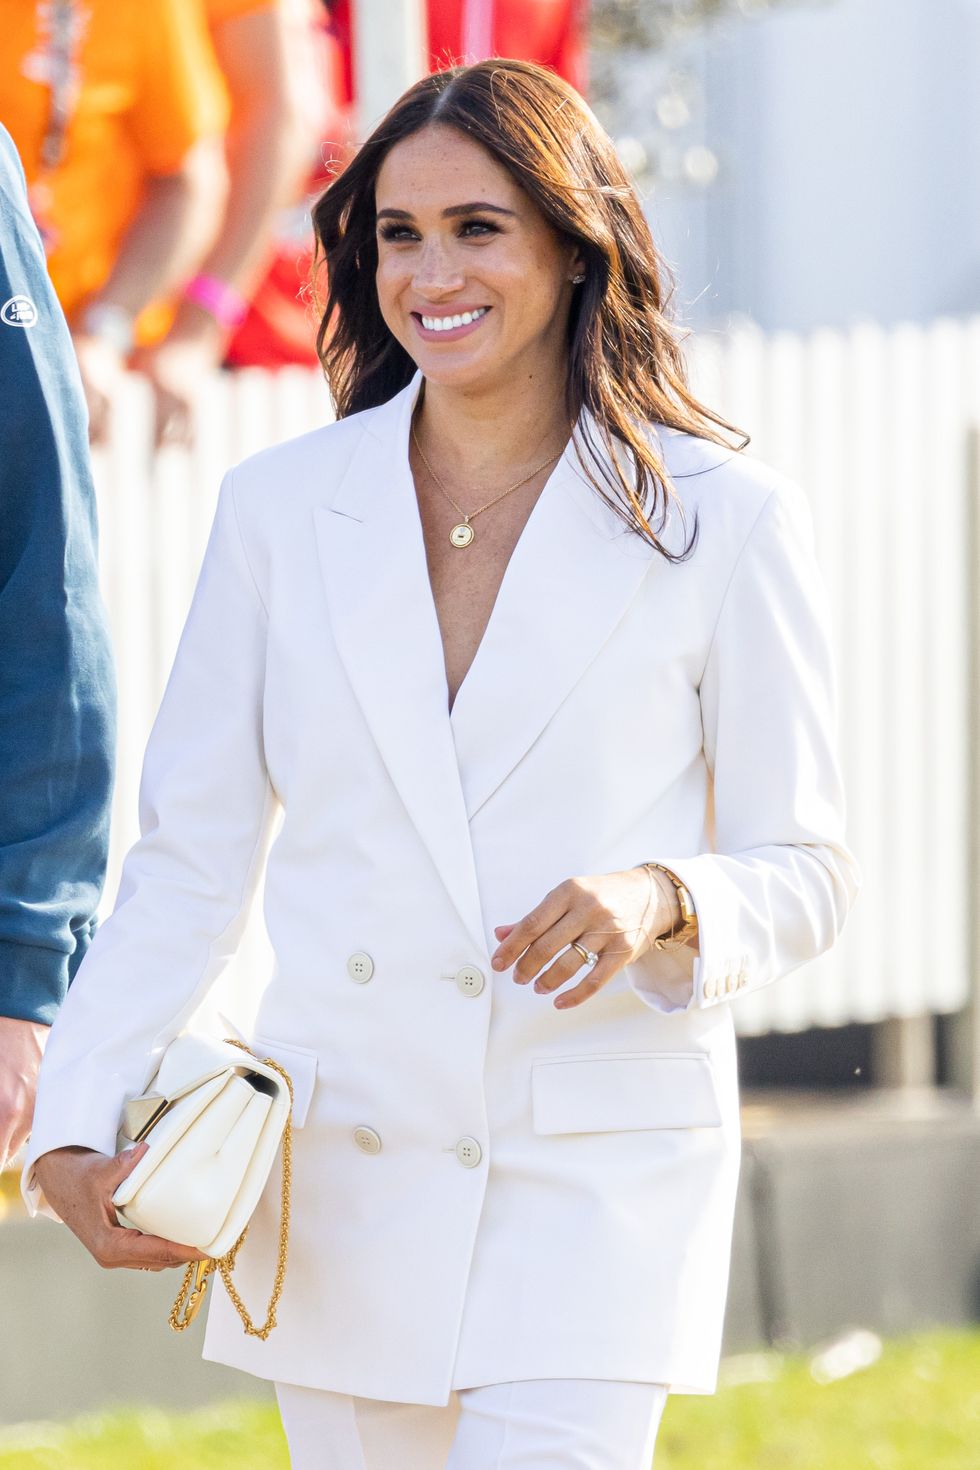 Meghan Markle wears white Valentino suit to Invictus Games in The Hague